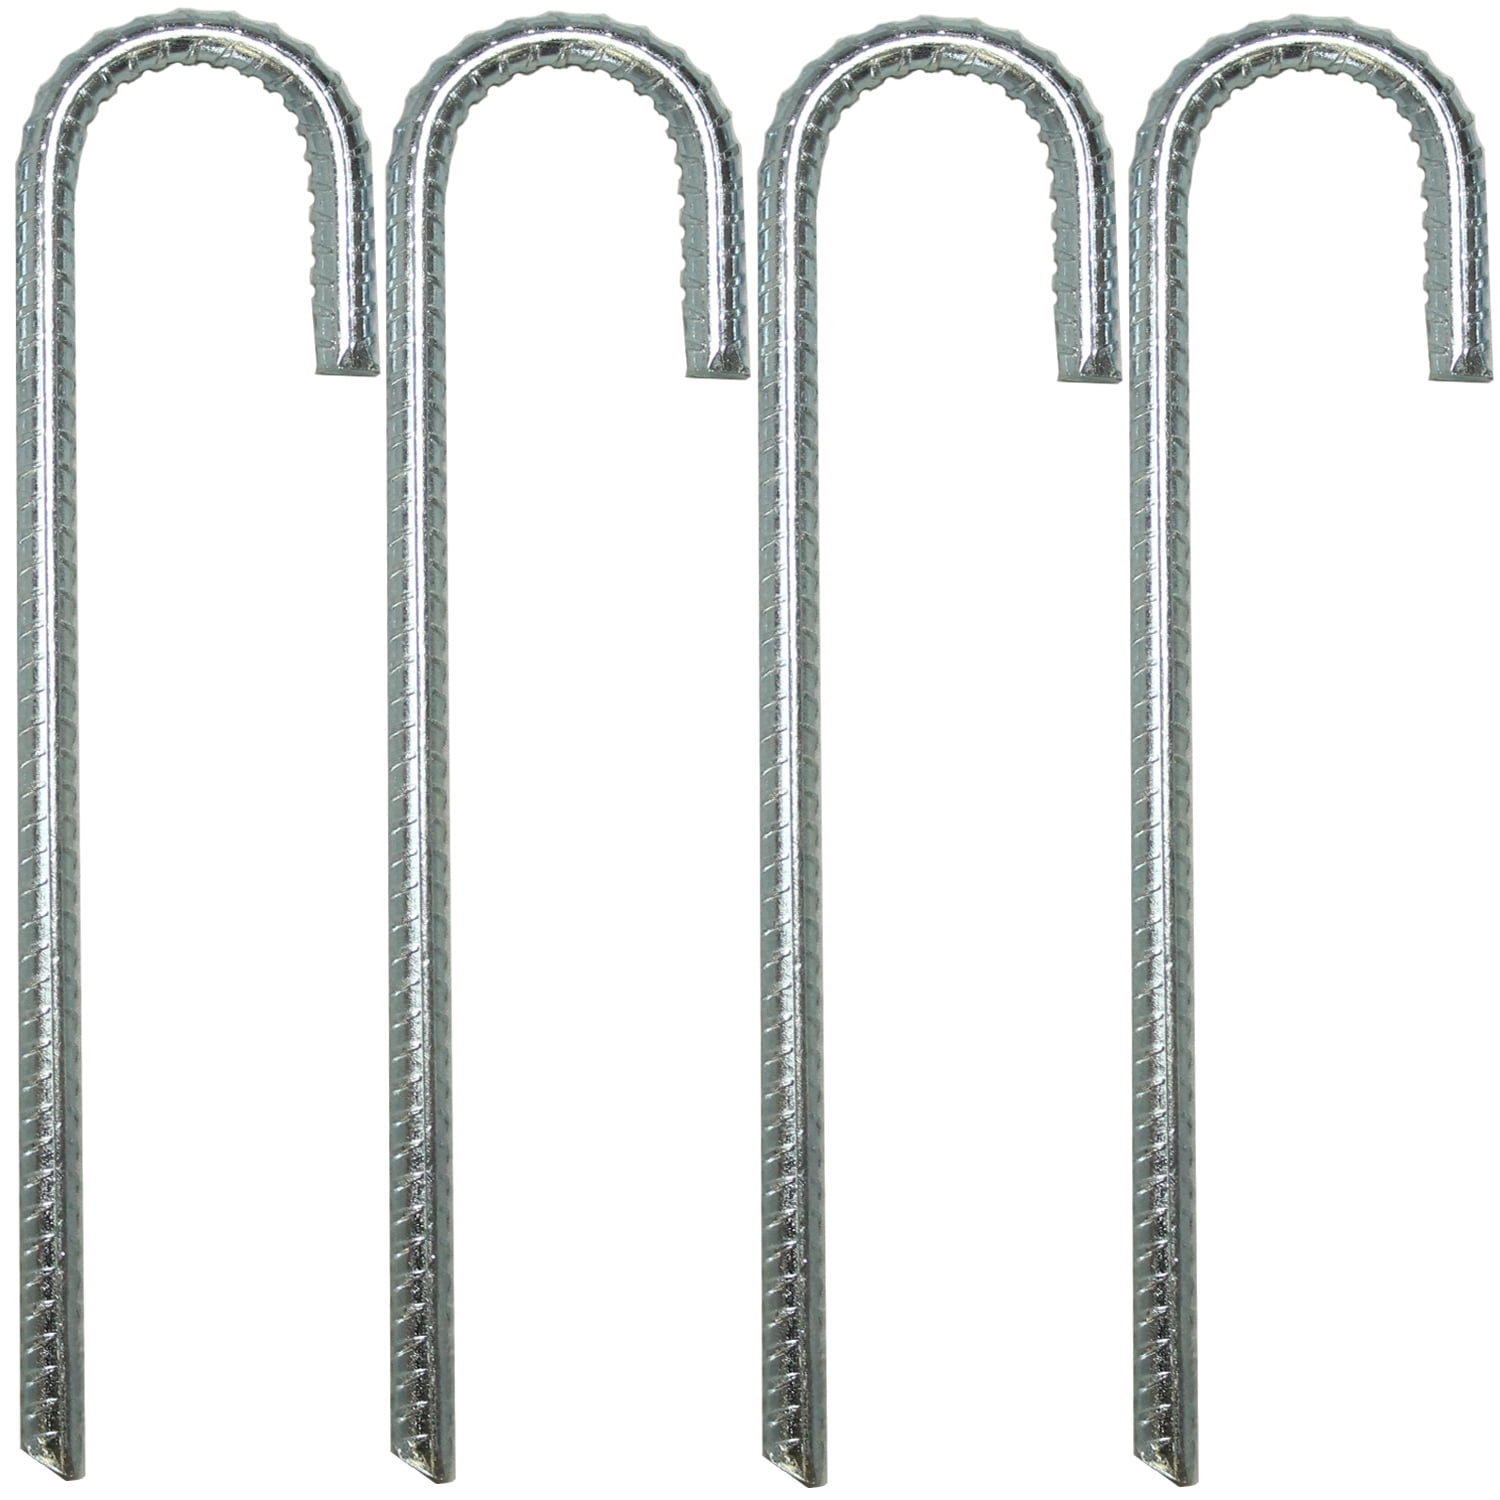 Details about   100Pcs 6" Anti-Rust' 11 Gauge Heavy-Duty U-Shaped Garden stakes/Pins/Spikes/Pegs 